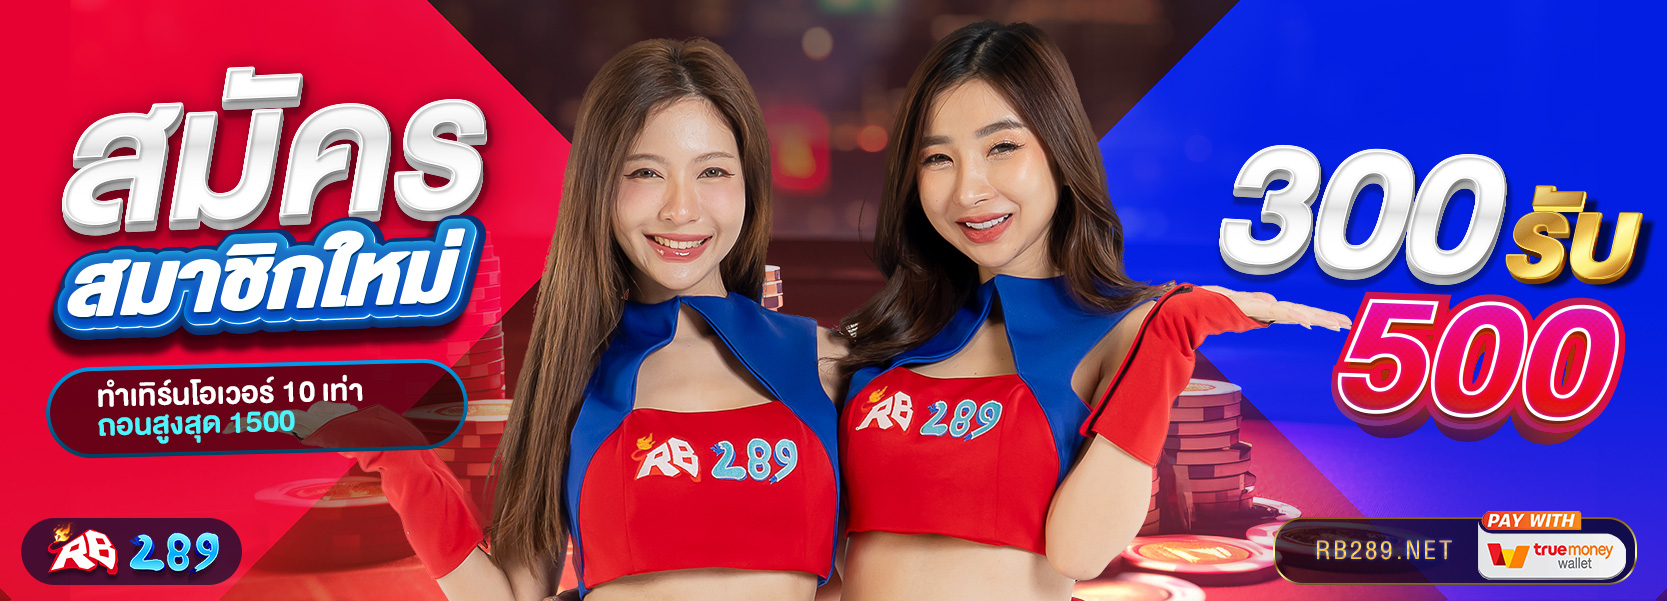 RB289 Homepage banner 1